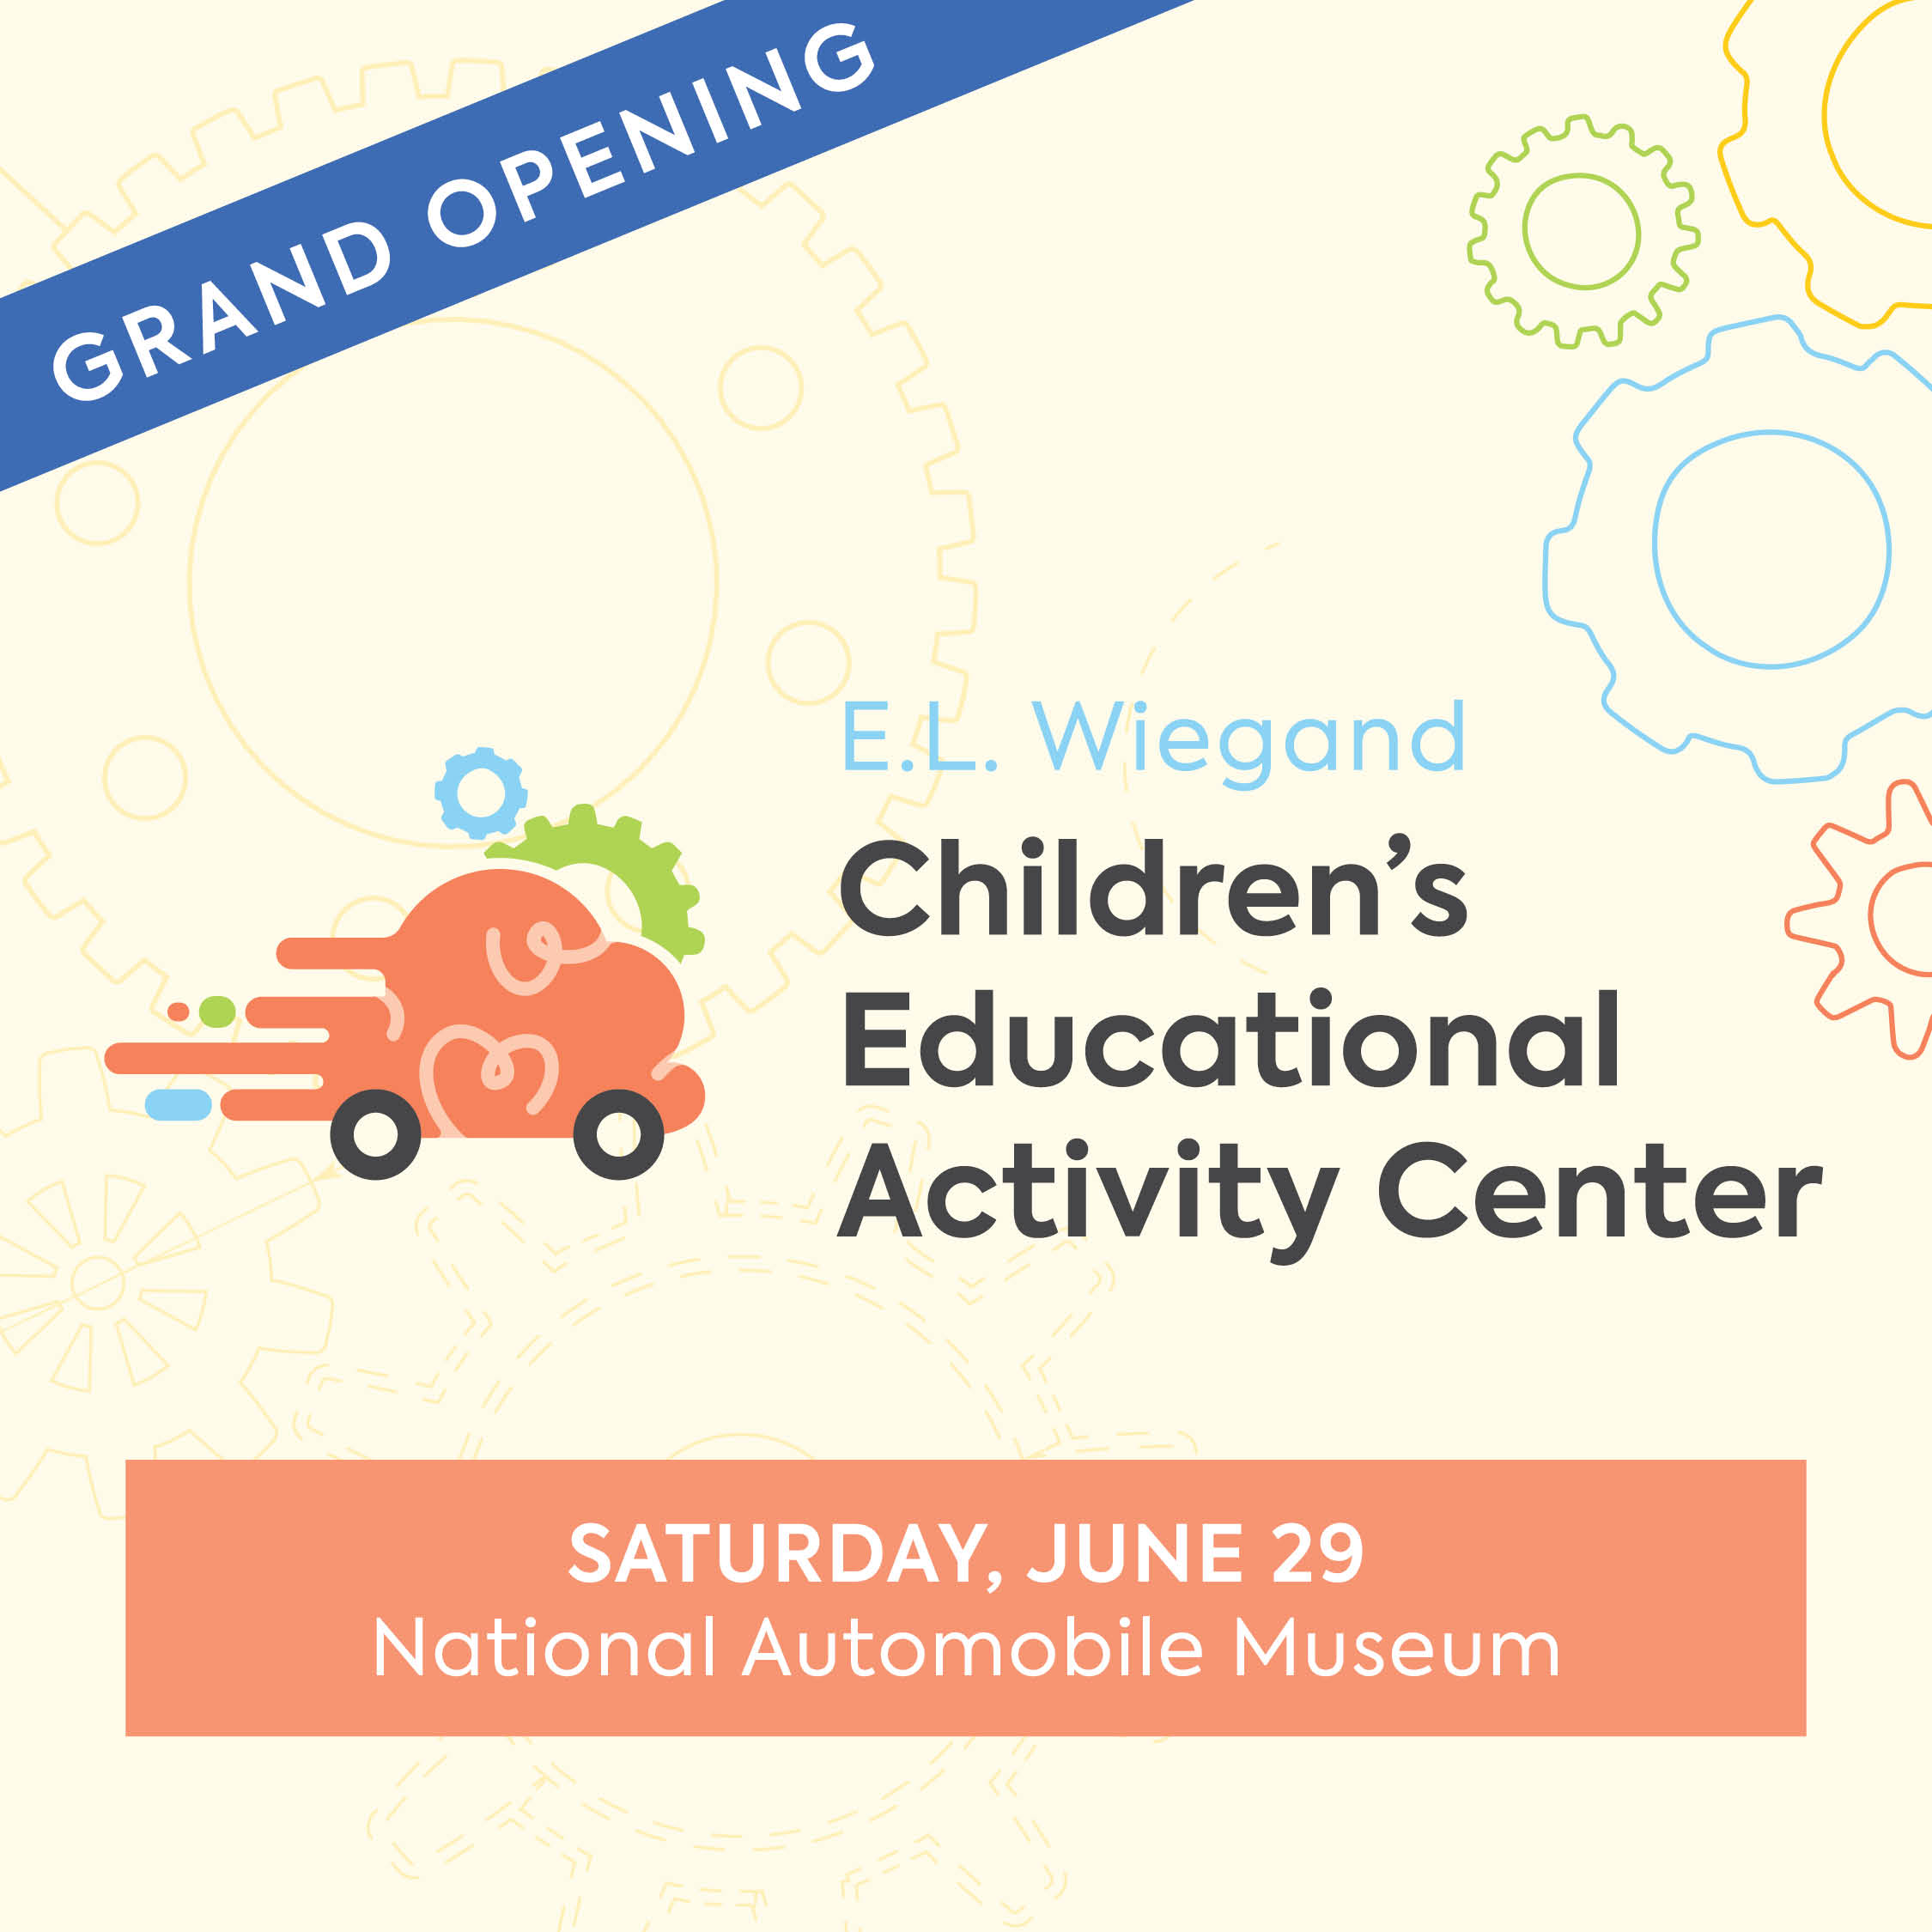 GRAND OPENING – E.L. WIEGAND CHILDREN’S EDUCATIONAL ACTIVITY CENTER